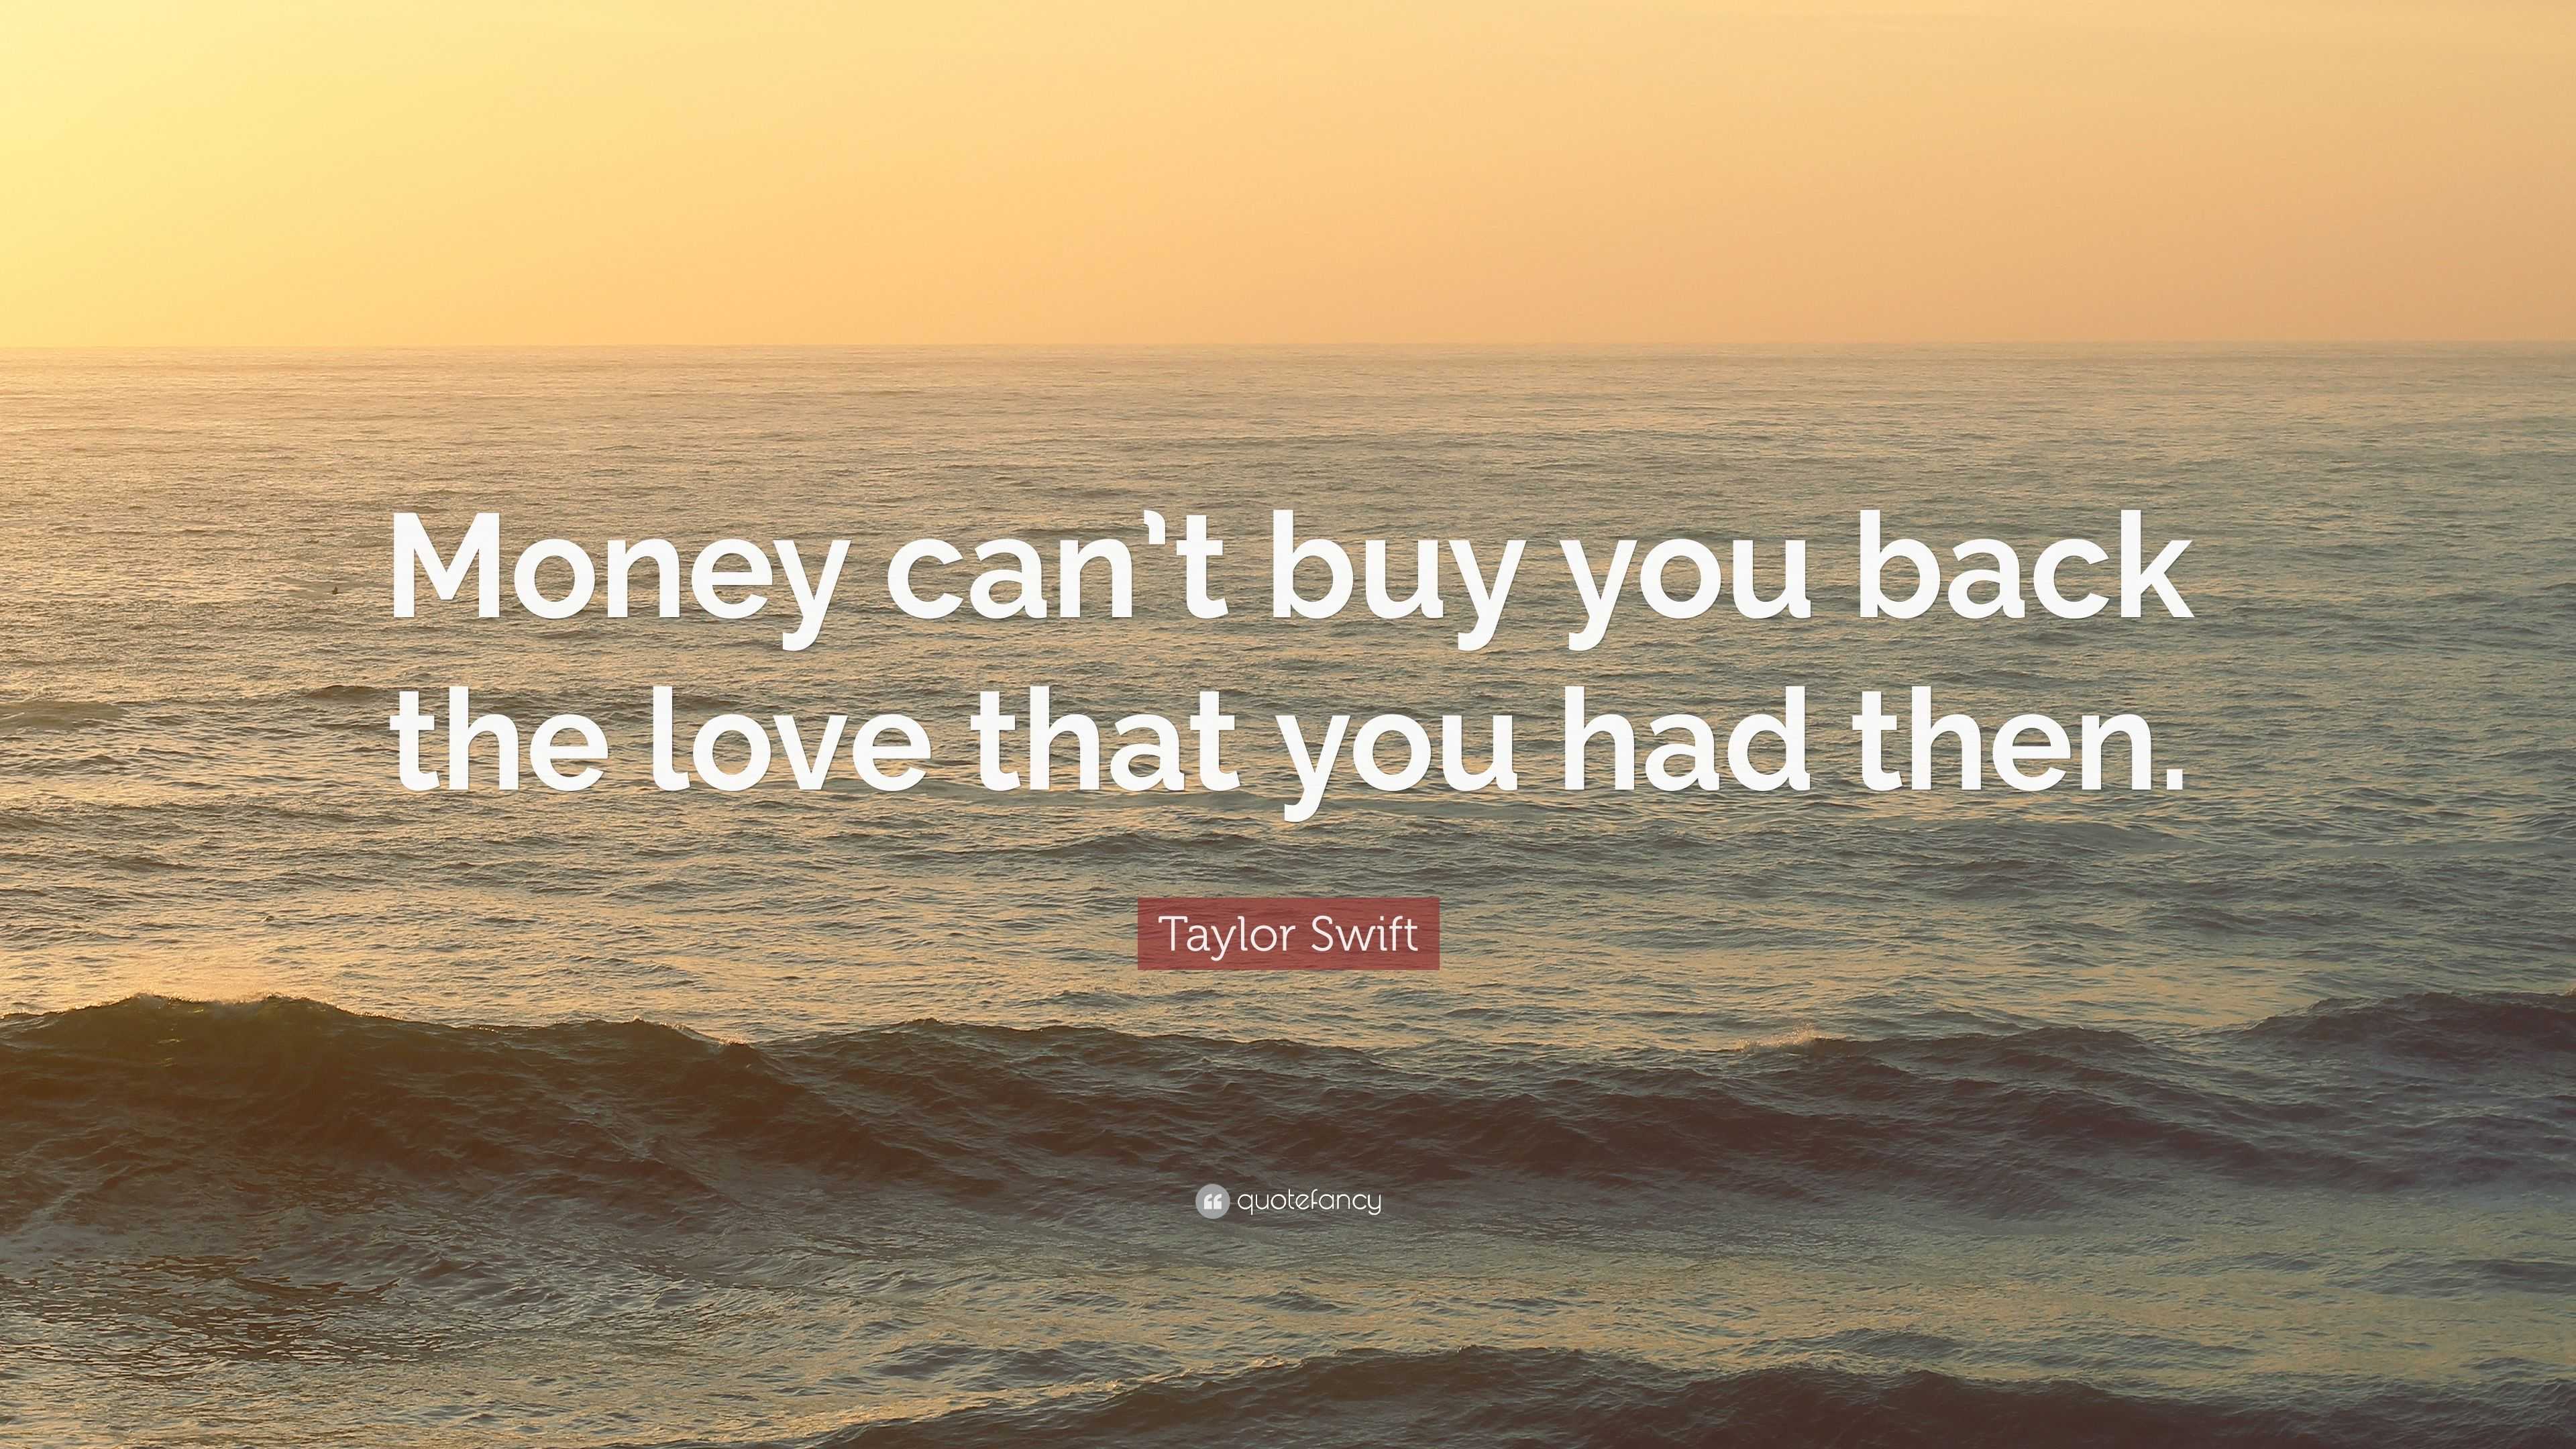 Taylor Swift Quote “Money can t you back the love that you